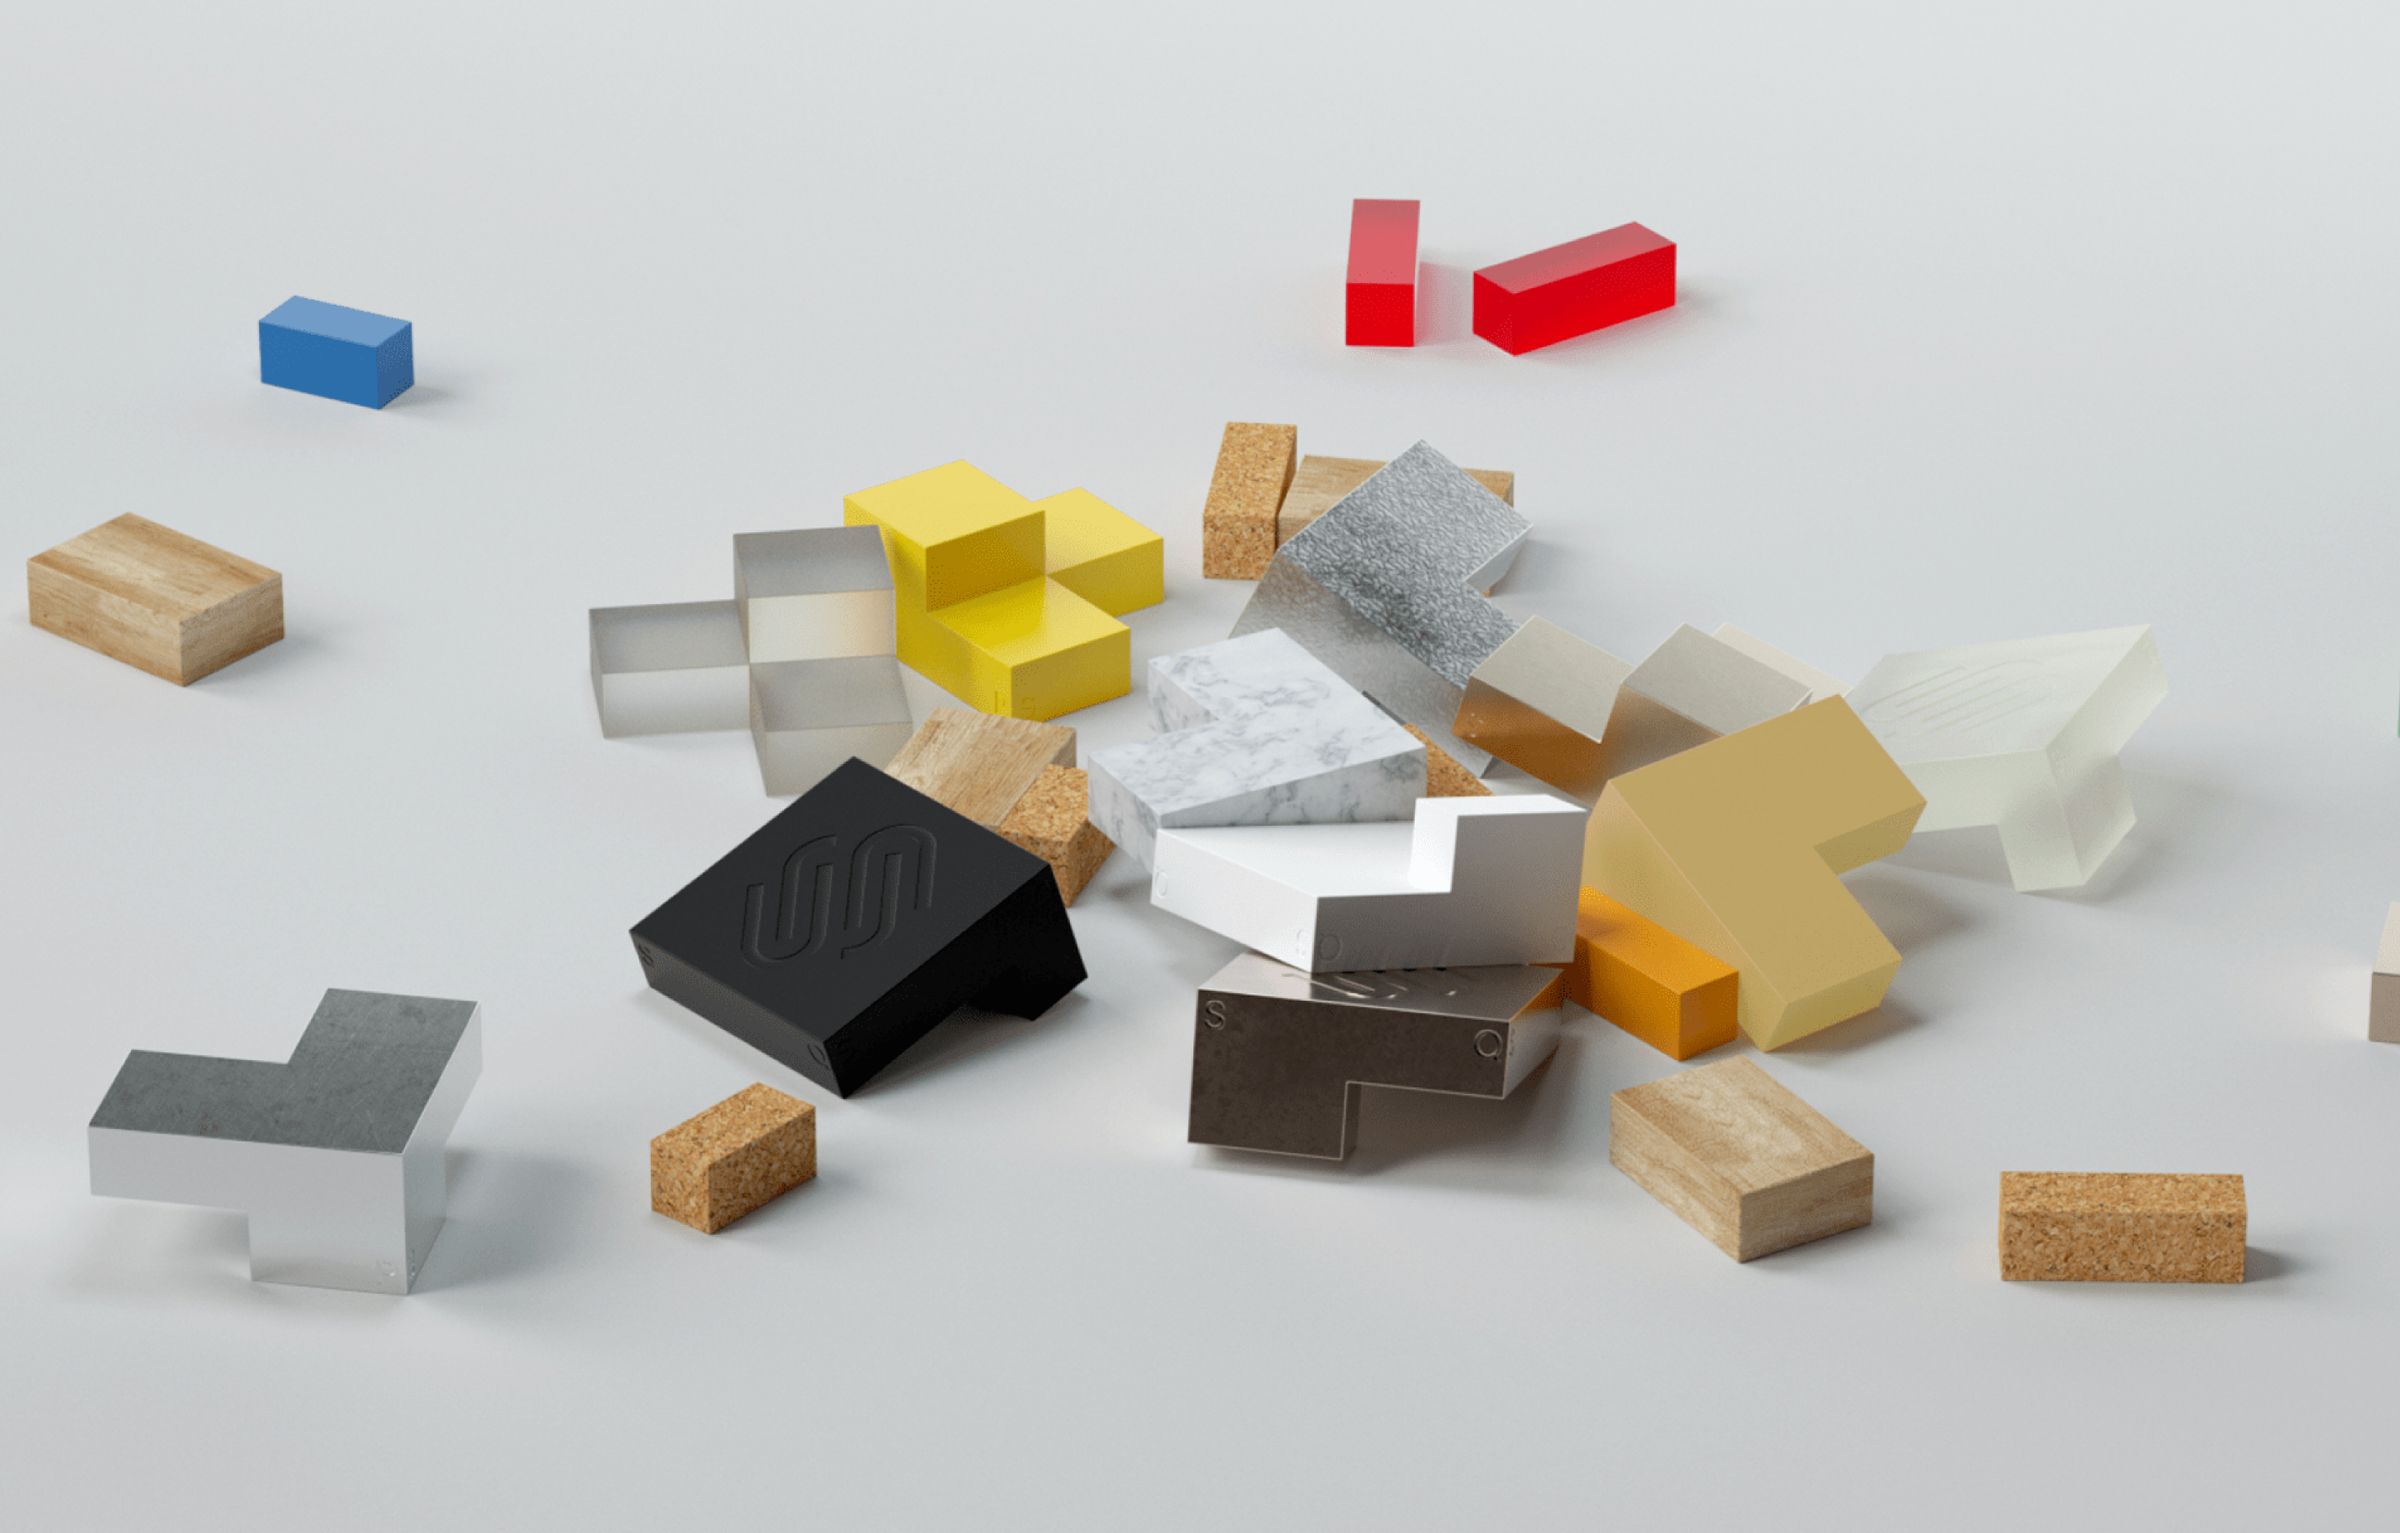 Colorful geometric shapes of different materials scattered on a gray surface.